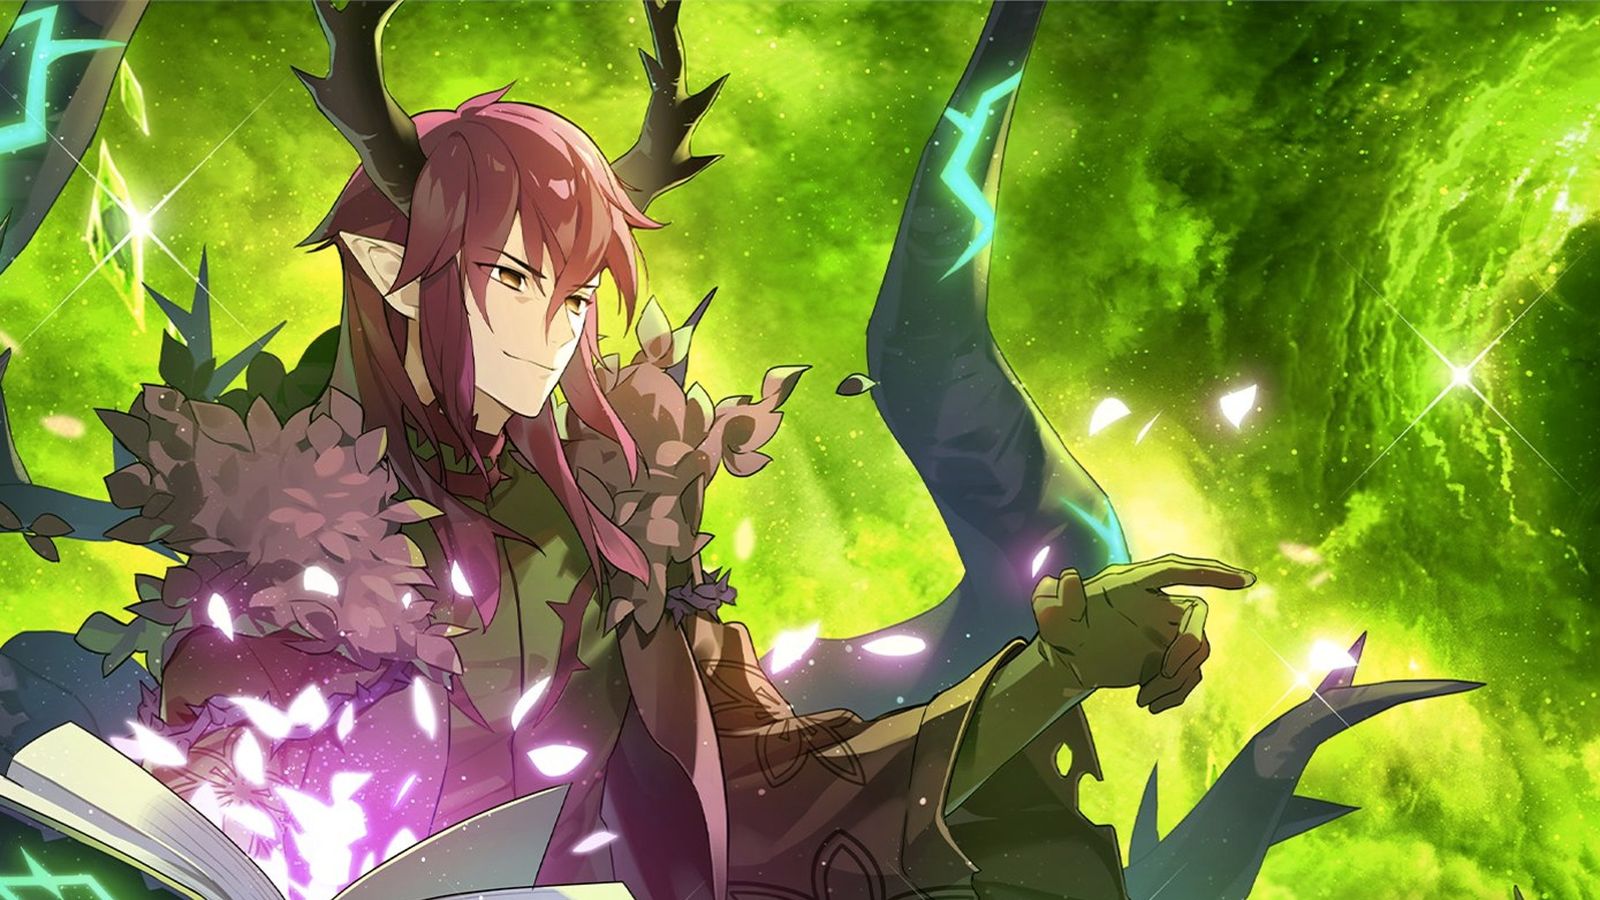 Image of an anime character casting a spell in Epic Seven.